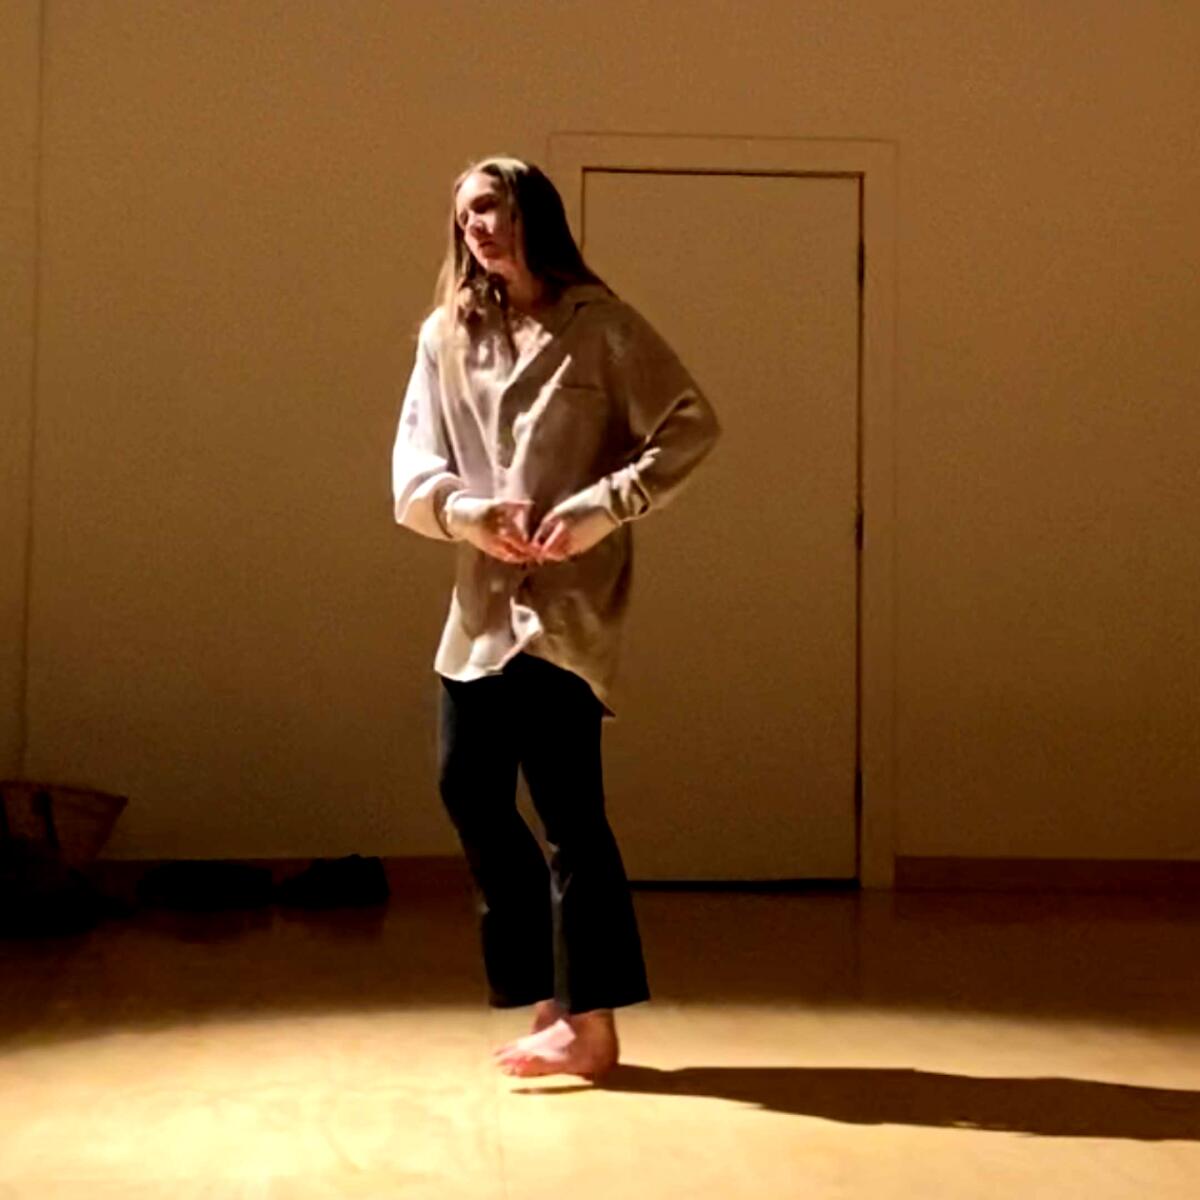 A woman standing in the middle of a dance studio.